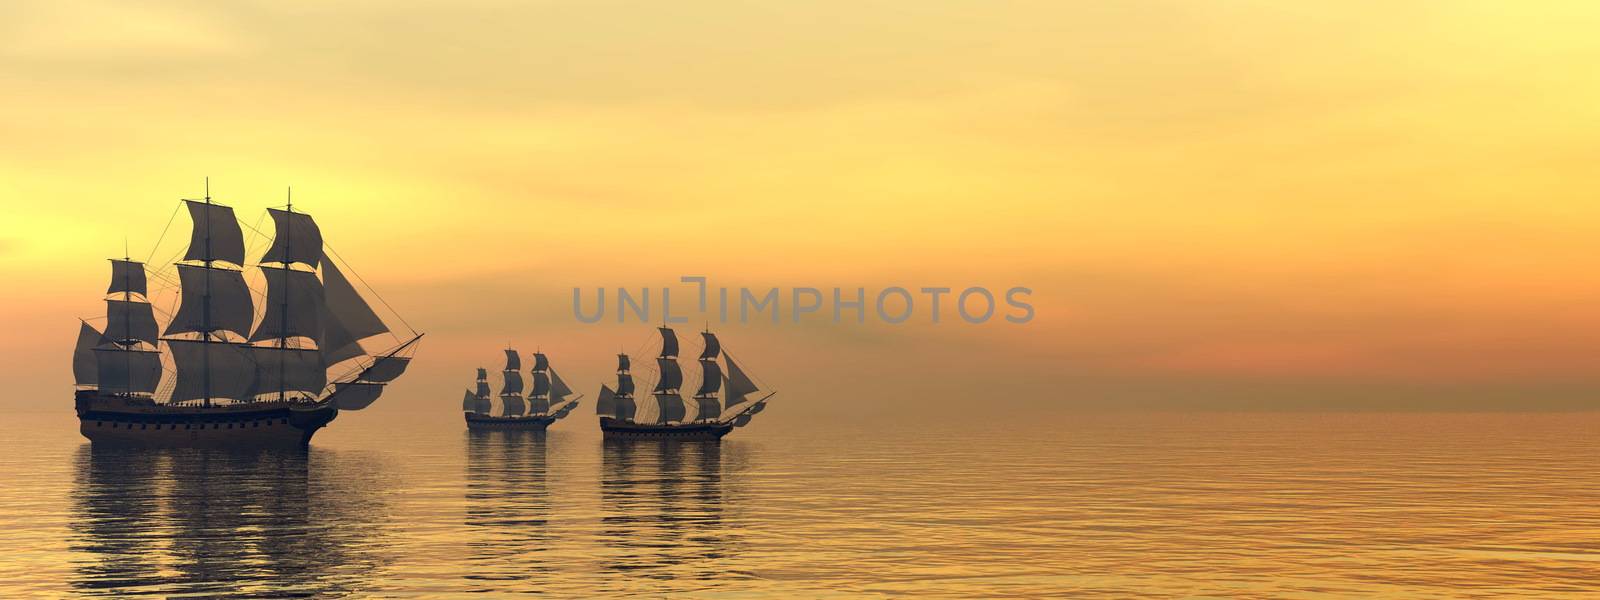 Three beautiful old merchant ships floating on quiet water by sunset light